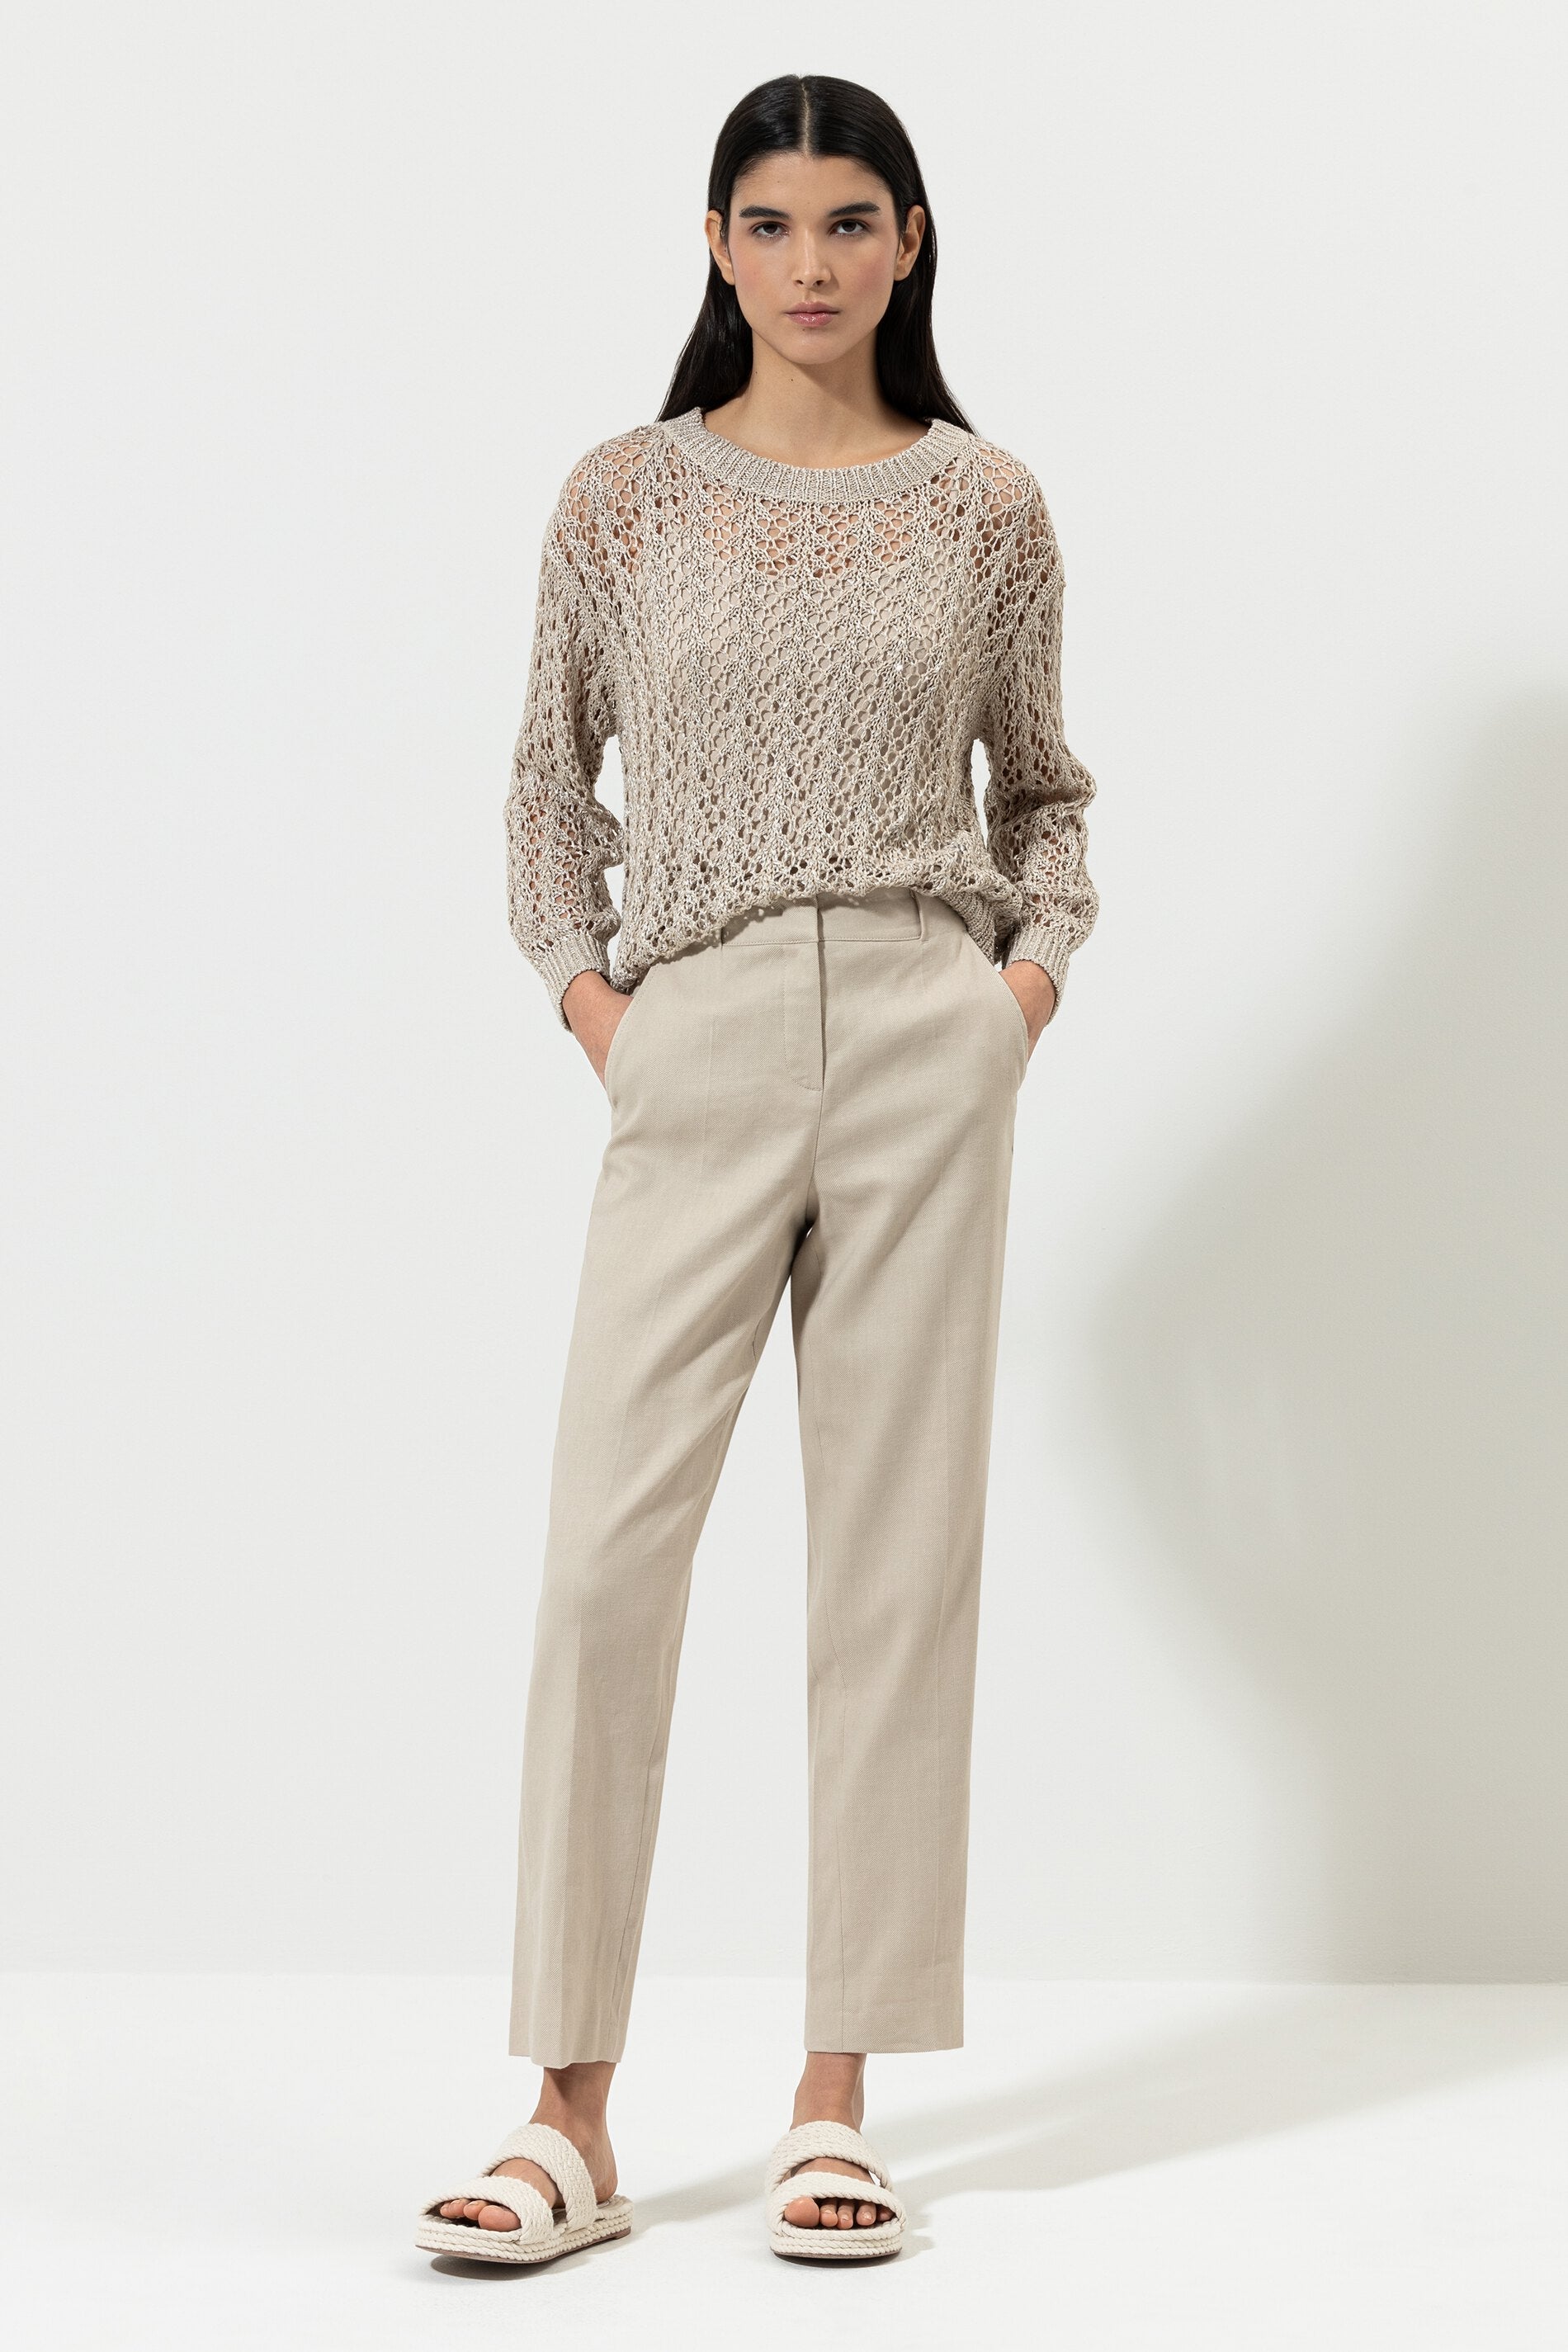 LUISA-CERANO-OUTLET-SALE-Tapered-Pants-aus-Leinen-Mix-Hosen-ARCHIVE-COLLECTION_b1f3f8f2-f758-444c-b0d1-3d58fe3cad3f.jpg